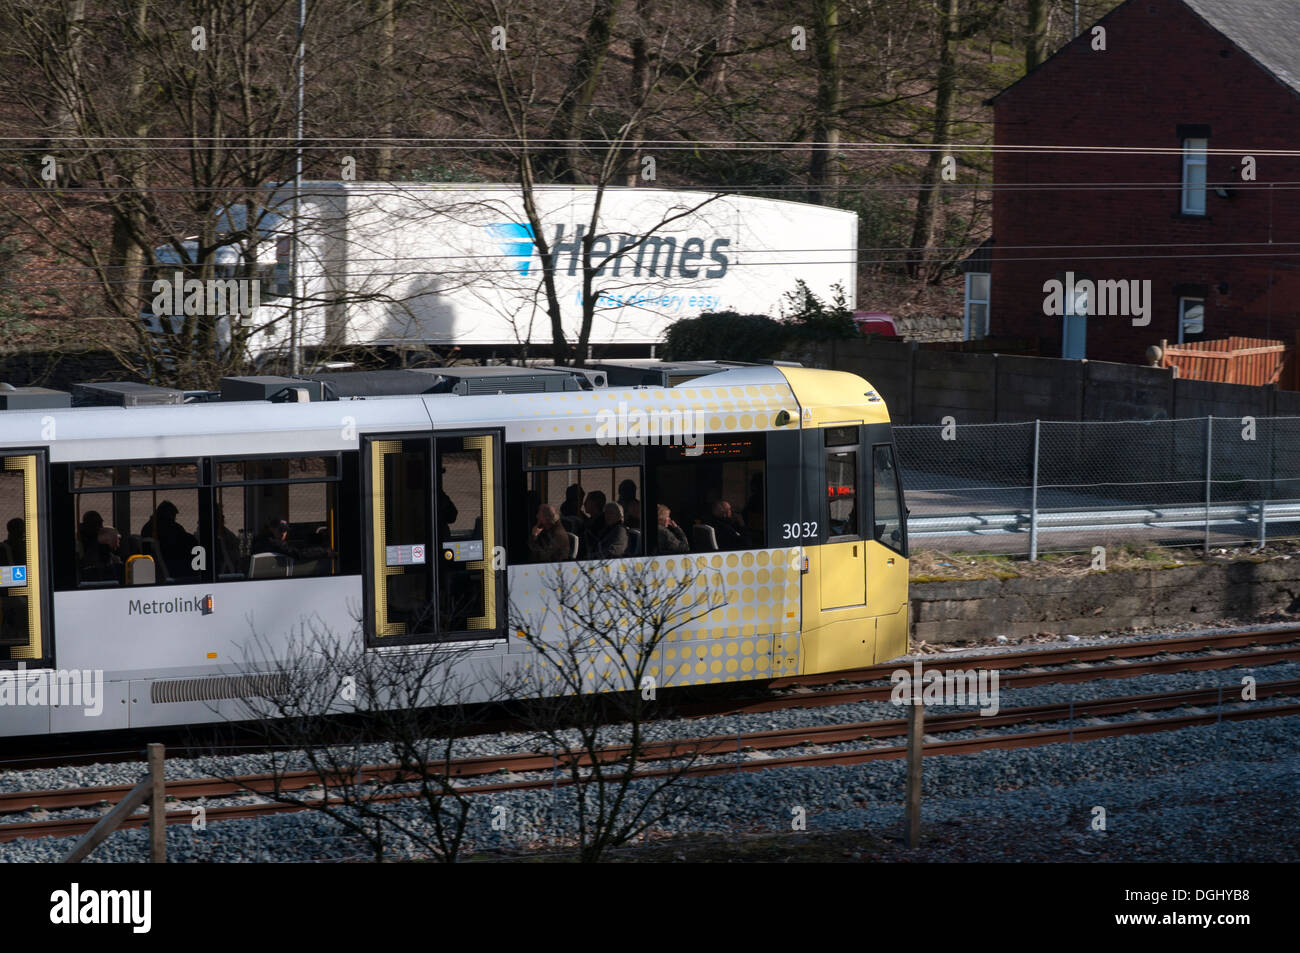 Metrolink tram on the Oldham-Rochdale line in the Beal valley near Jubilee, just north of Shaw, Oldham, Manchester, England, UK Stock Photo